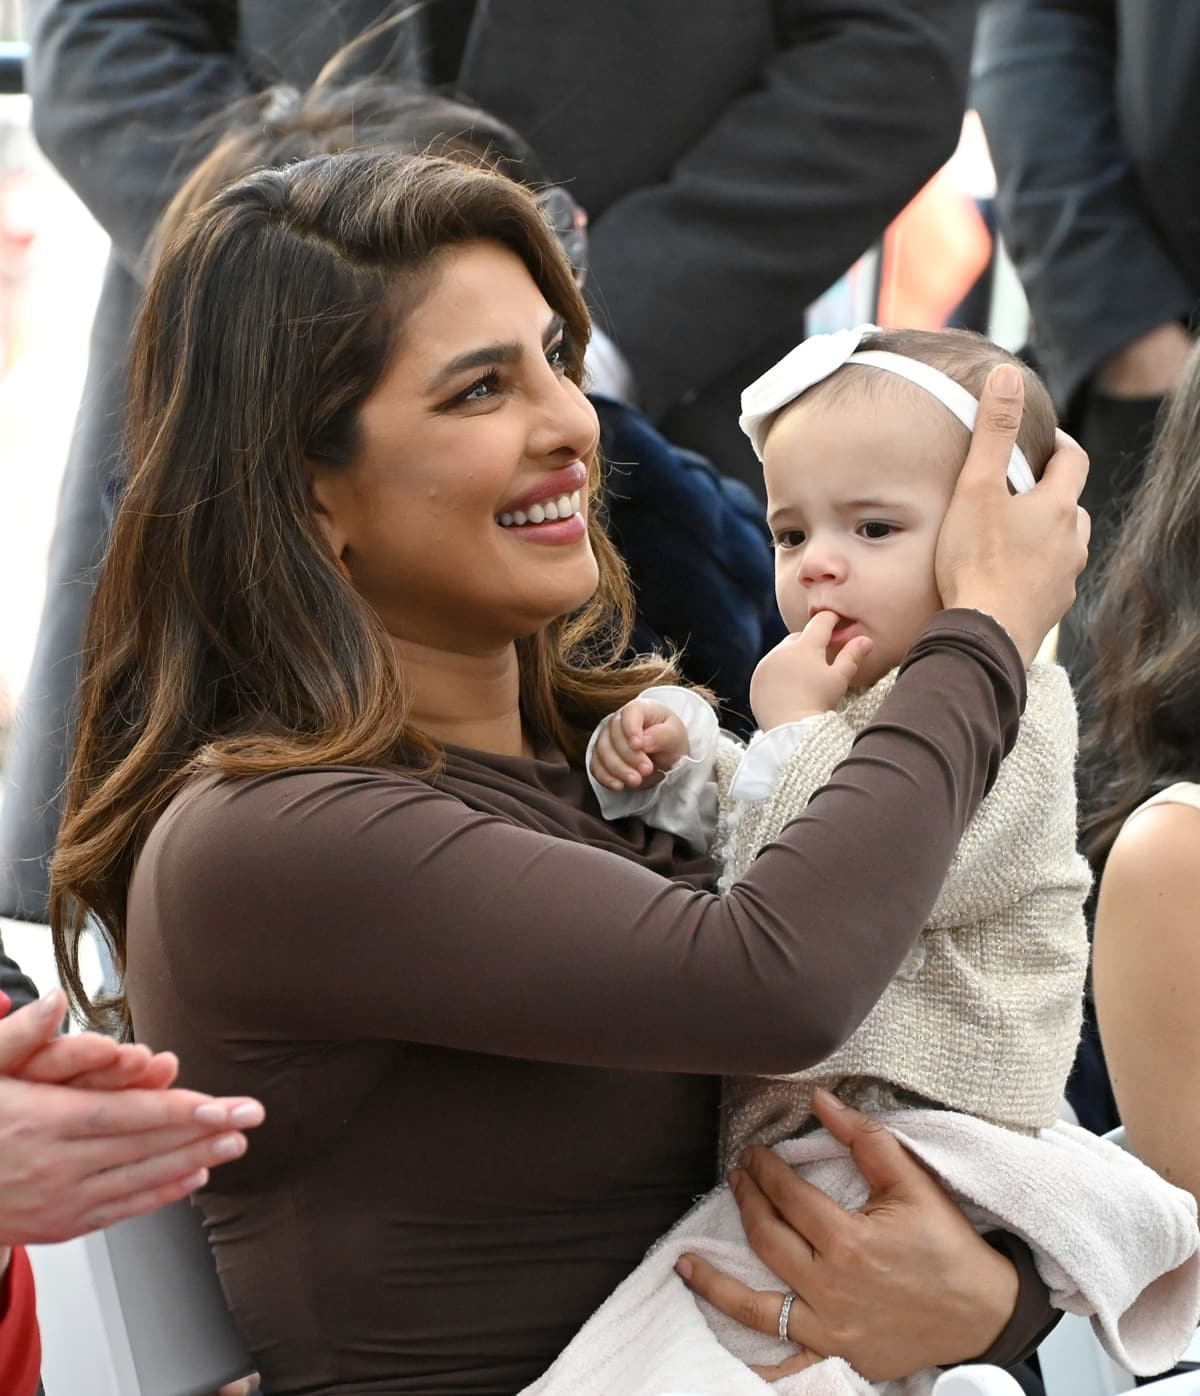 Nick Jonas and Priyanka Chopra's daughter, Malti Marie Chopra Jonas, made her public debut as she accompanied her parents at a star-studded event in LA